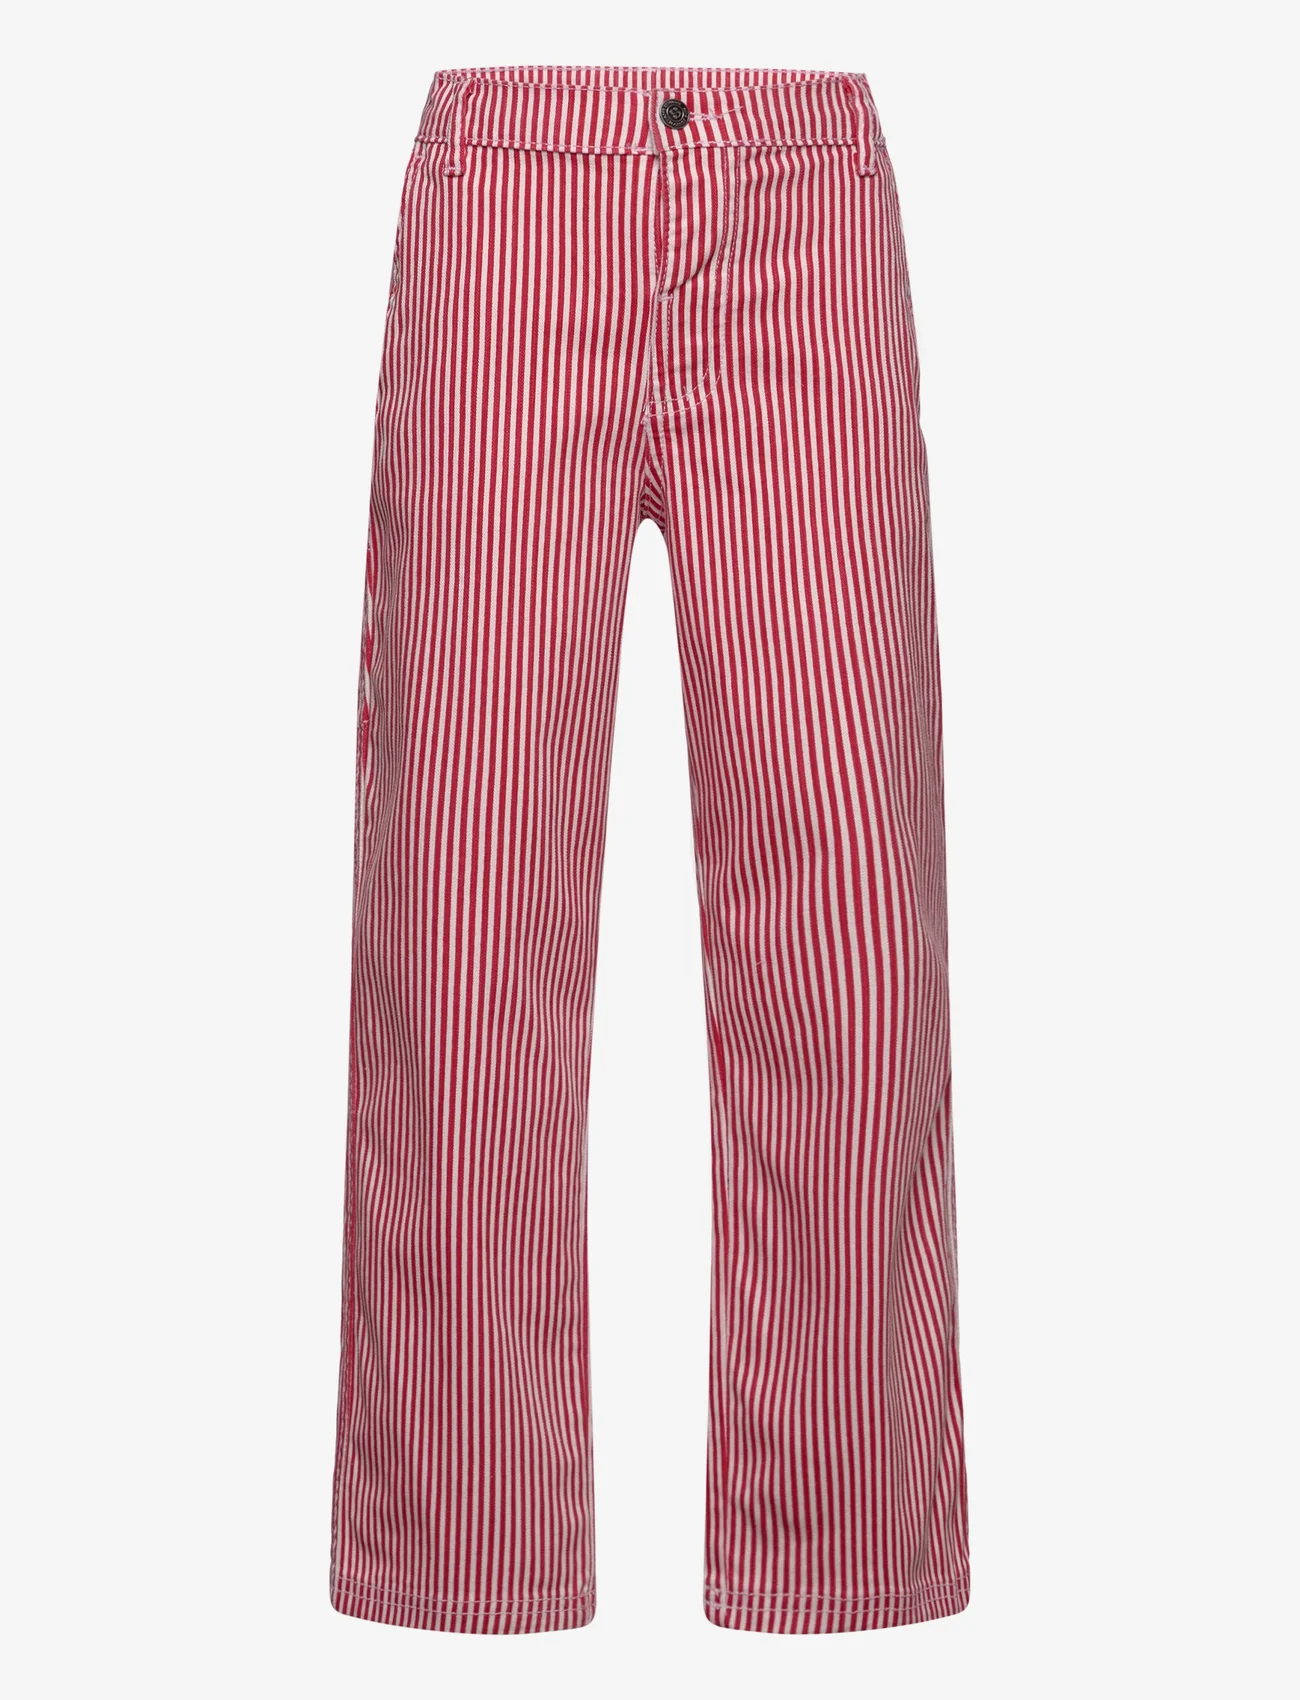 Sofie Schnoor Baby and Kids - Trousers - bukser - berry red - 0